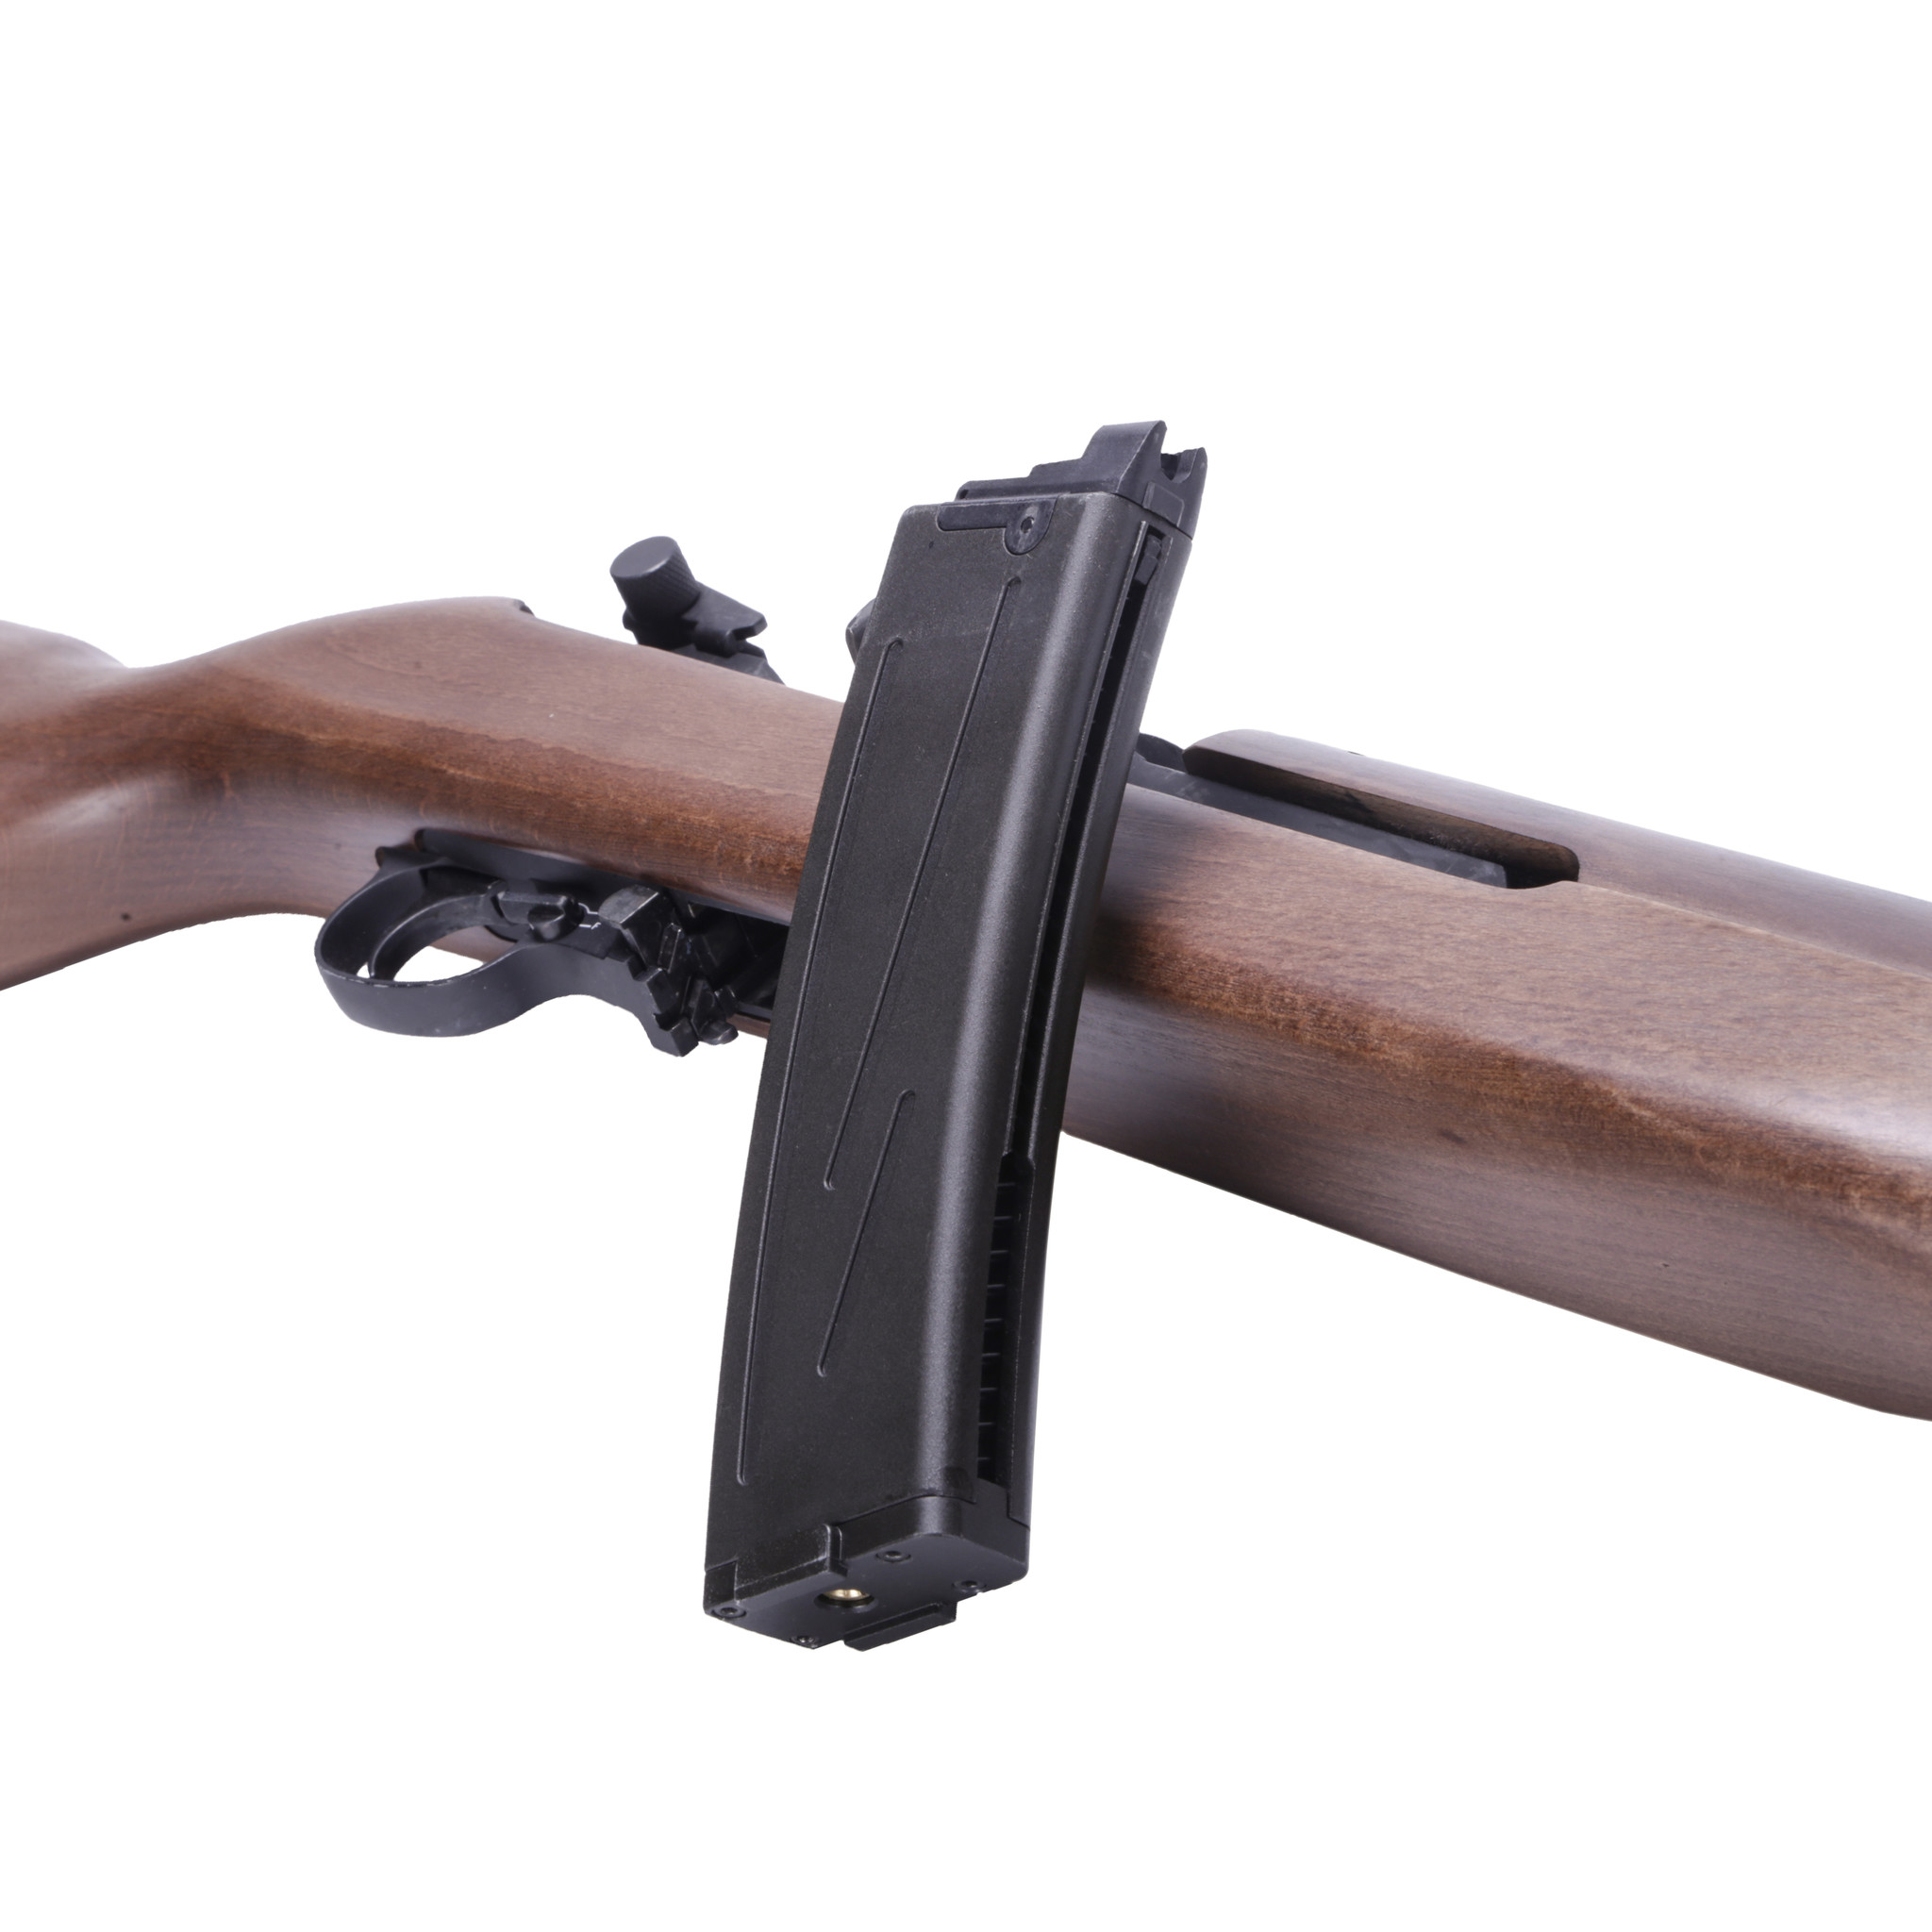 King Arms M1 Garand WWII GBBR 1.49 Joule - real wood